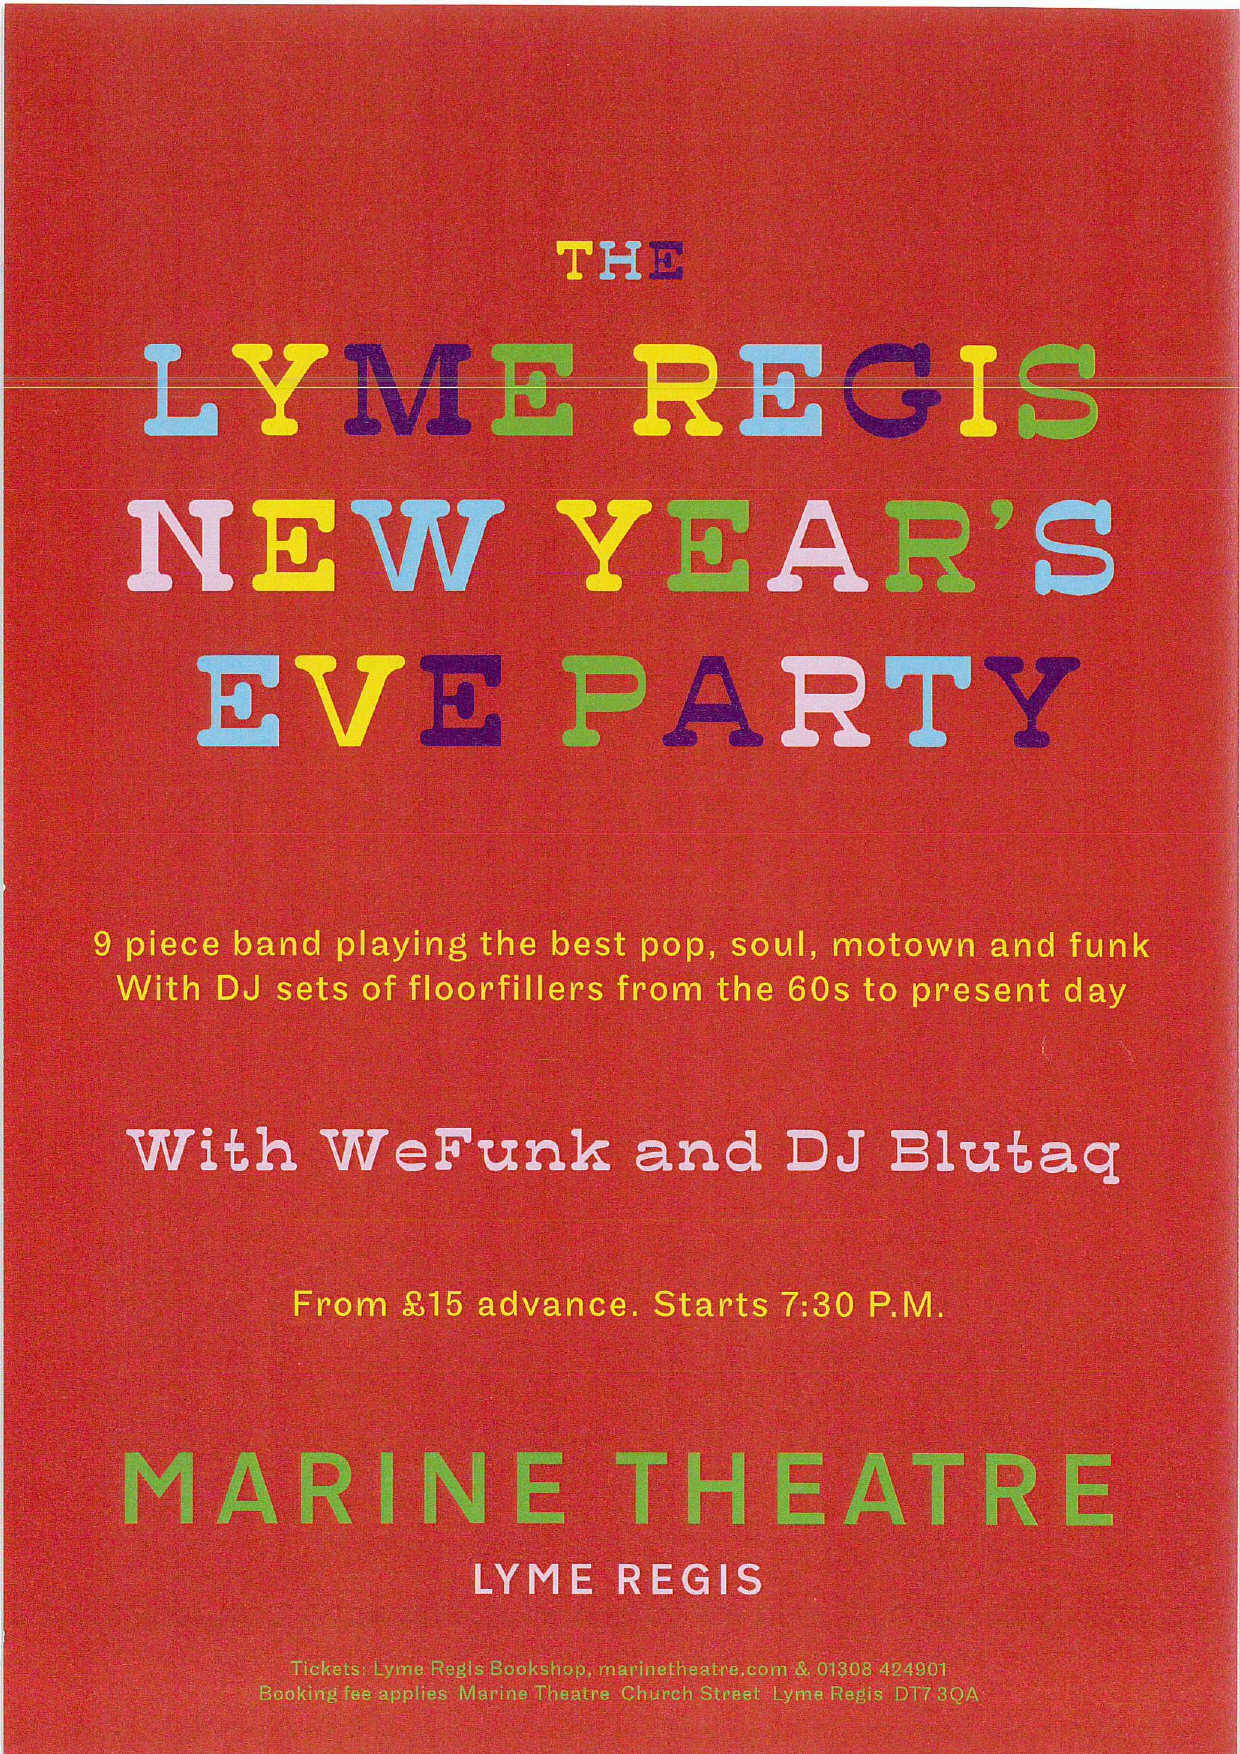 The Lyme Regis New Year's Eve Party